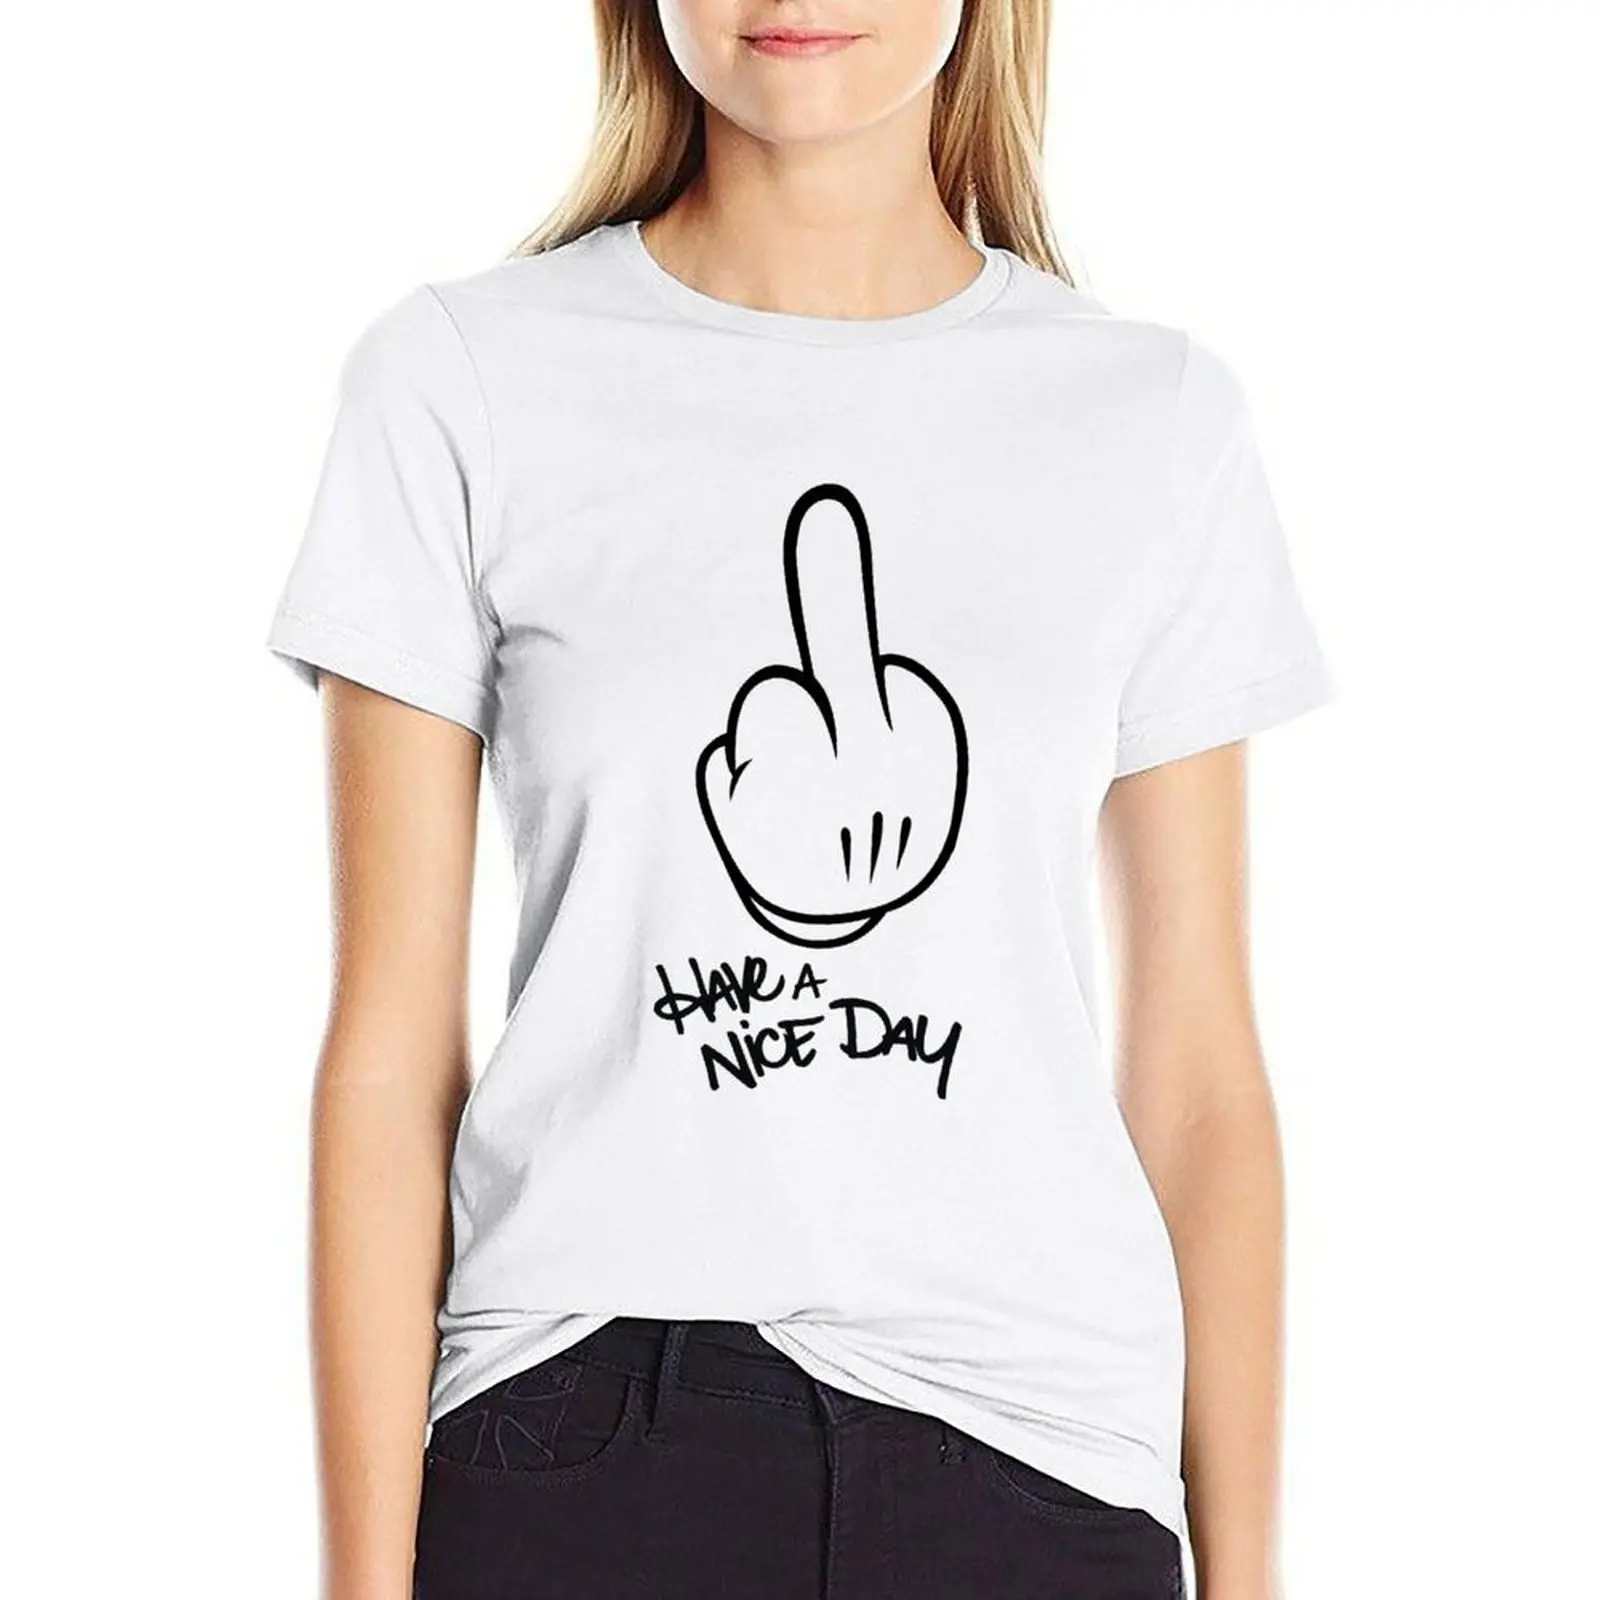 

Have a nice day T-shirt summer top kawaii clothes t-shirts for Women graphic tees funny